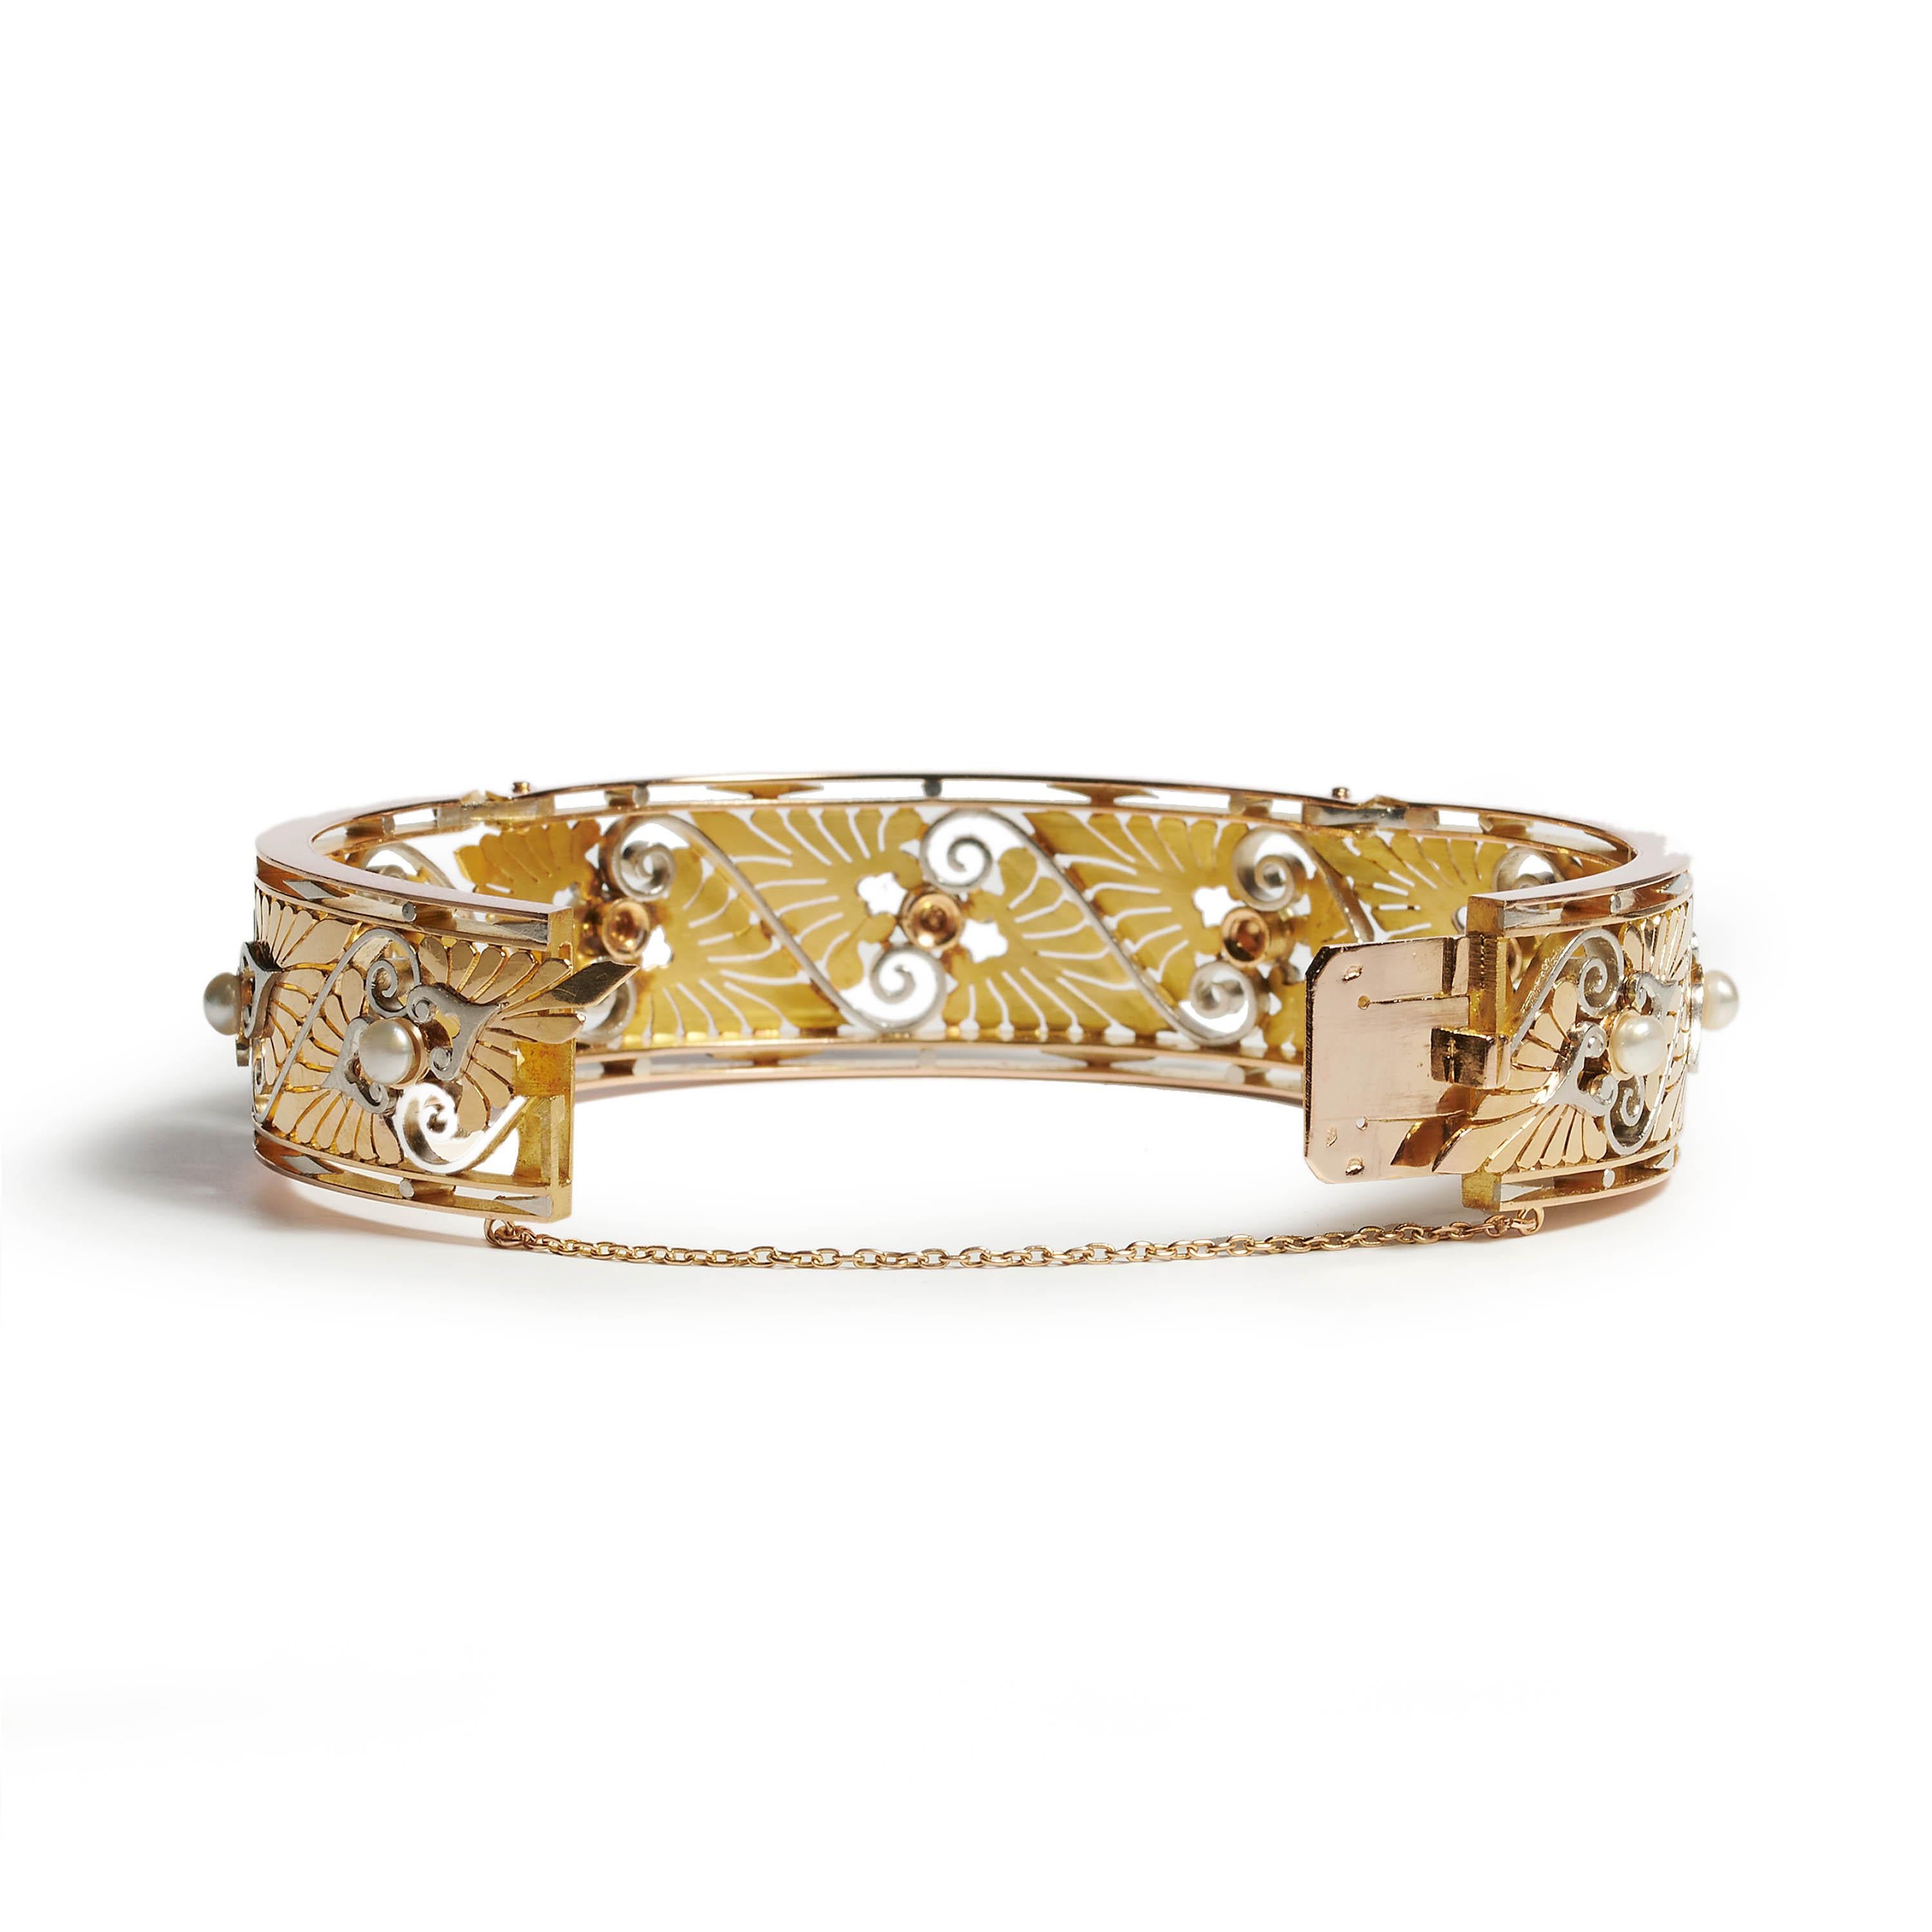 A French, Art Nouveau, pearl gold and platinum bangle, with a repeat pattern of bouton pearls, individually set between motifs of opposing gold acanthus leaves, divided by platinum scrolls, bordered by knife edges, with dot and lozenge infilled